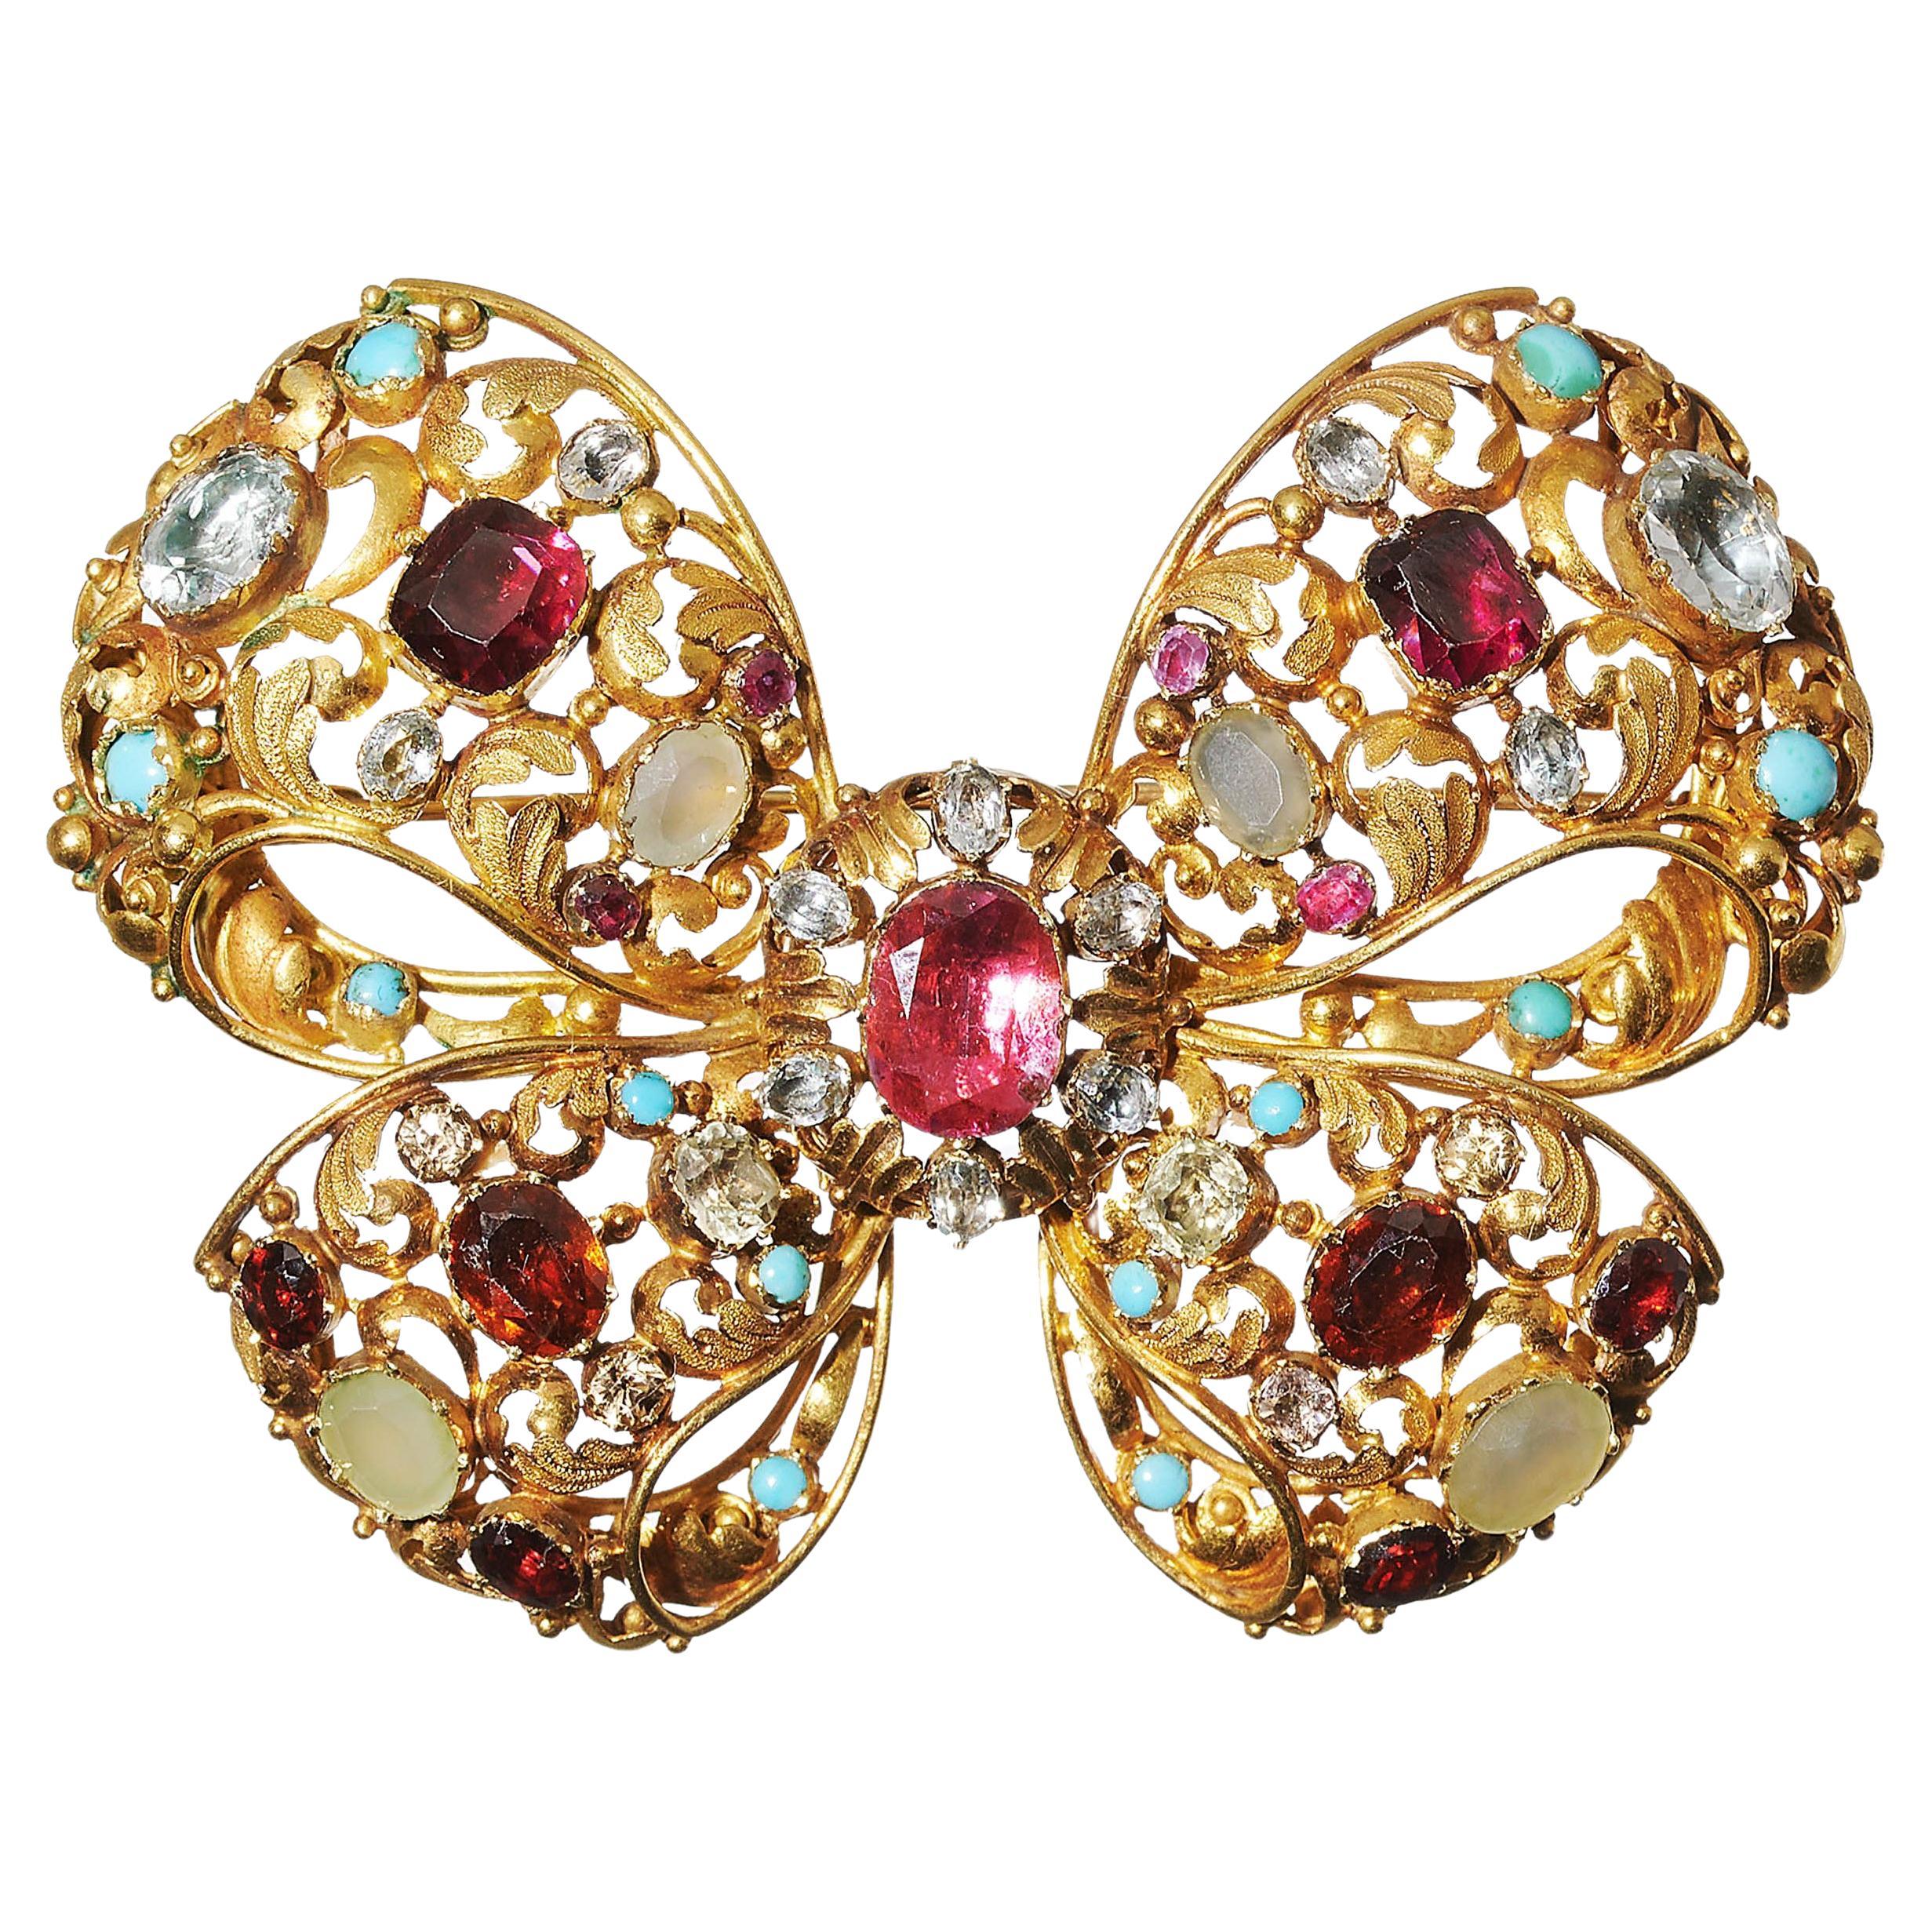 Antique Multi Gem and Gold Bow Brooch, Circa 1860